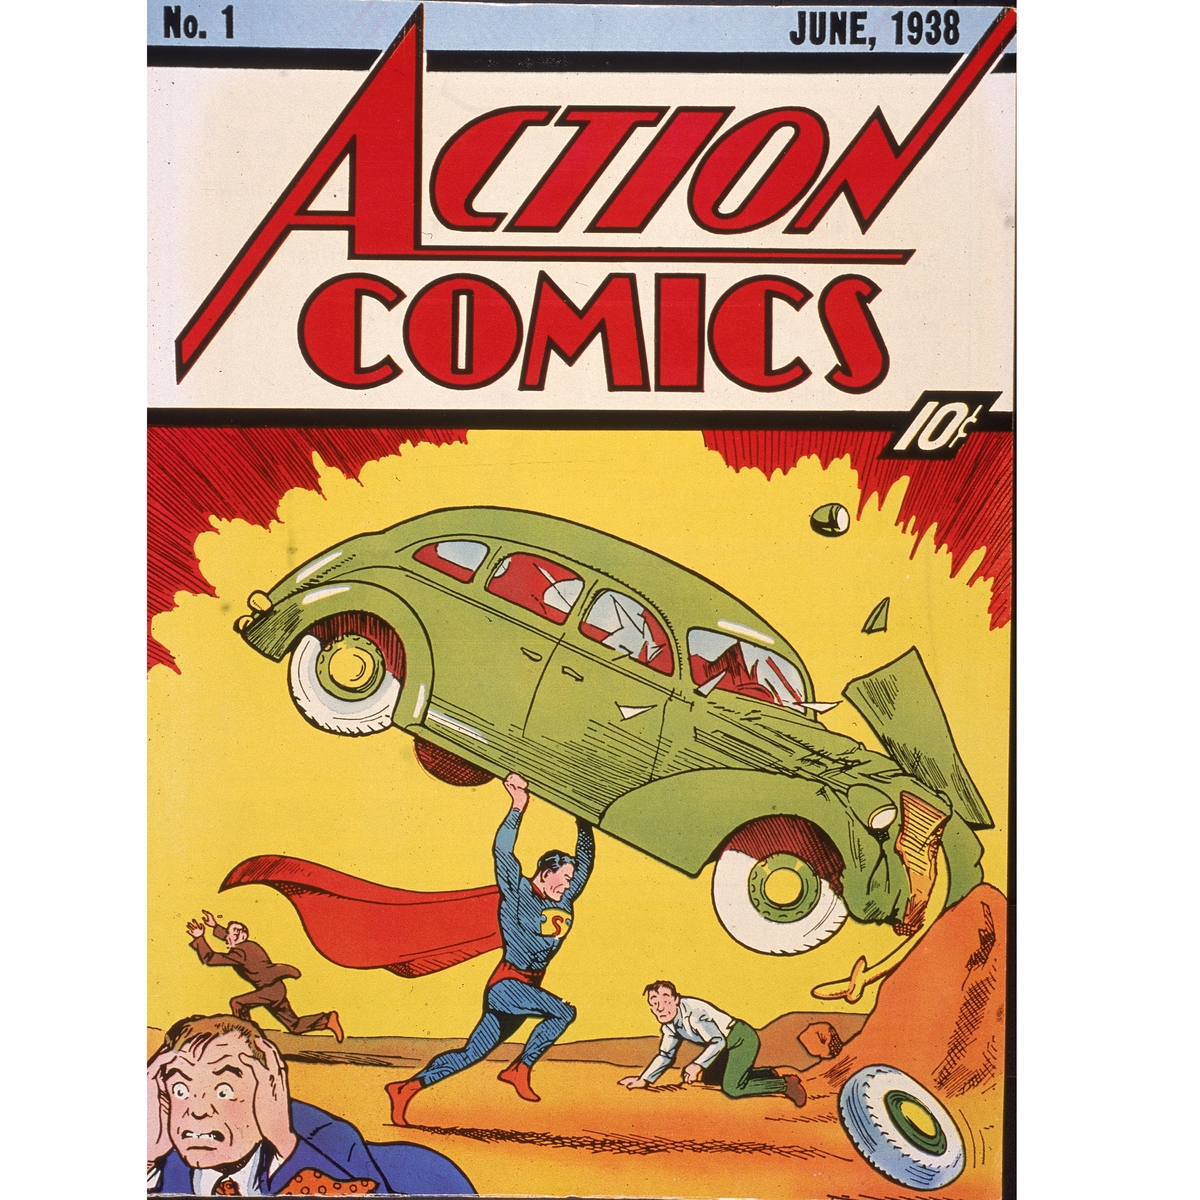 Superman’s debut, ‘Action Comics # 1’, has just sold over $ 3 million